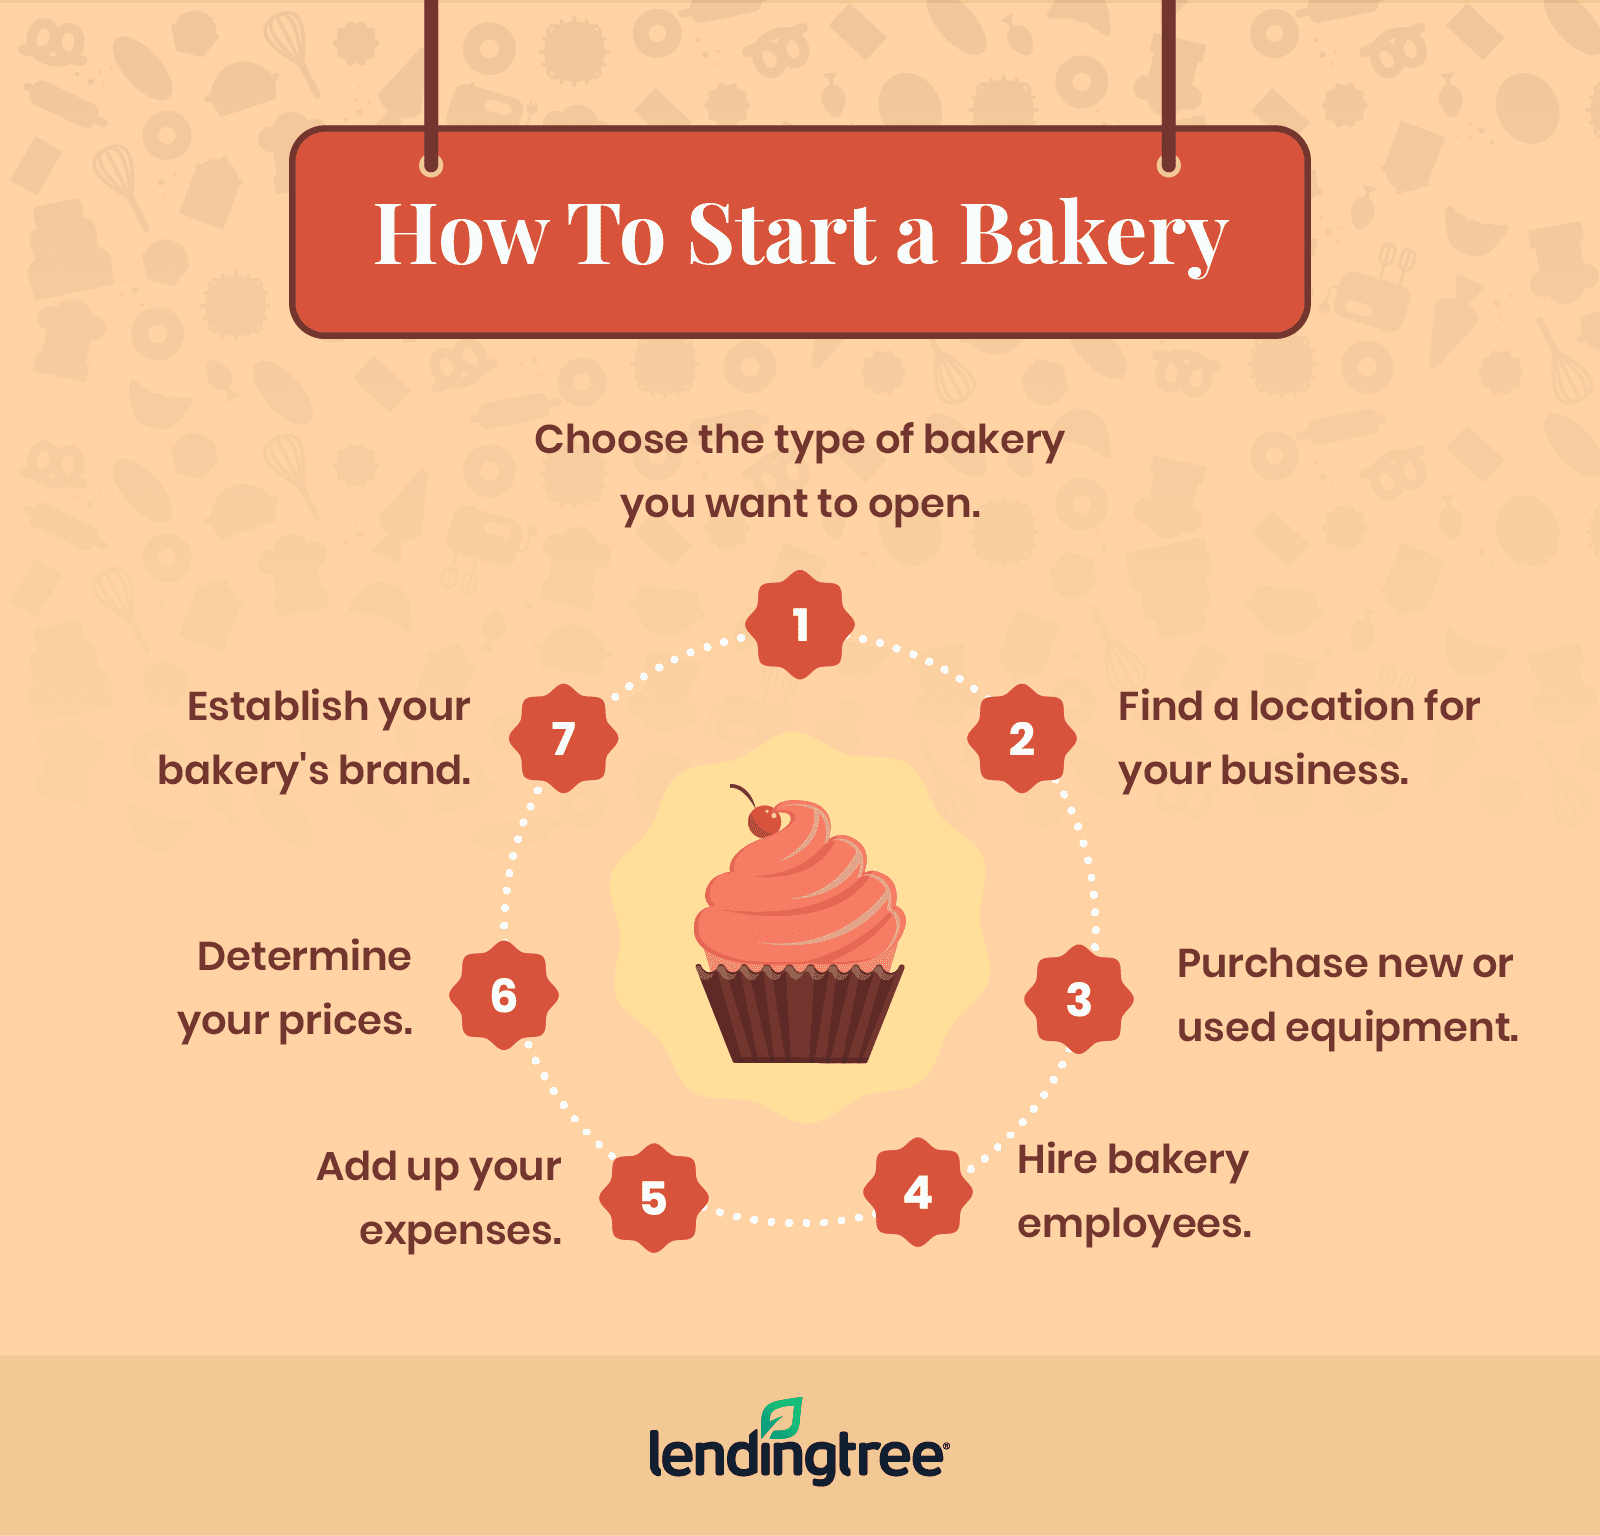 Essential Baking Supplies for Your Home Bakery